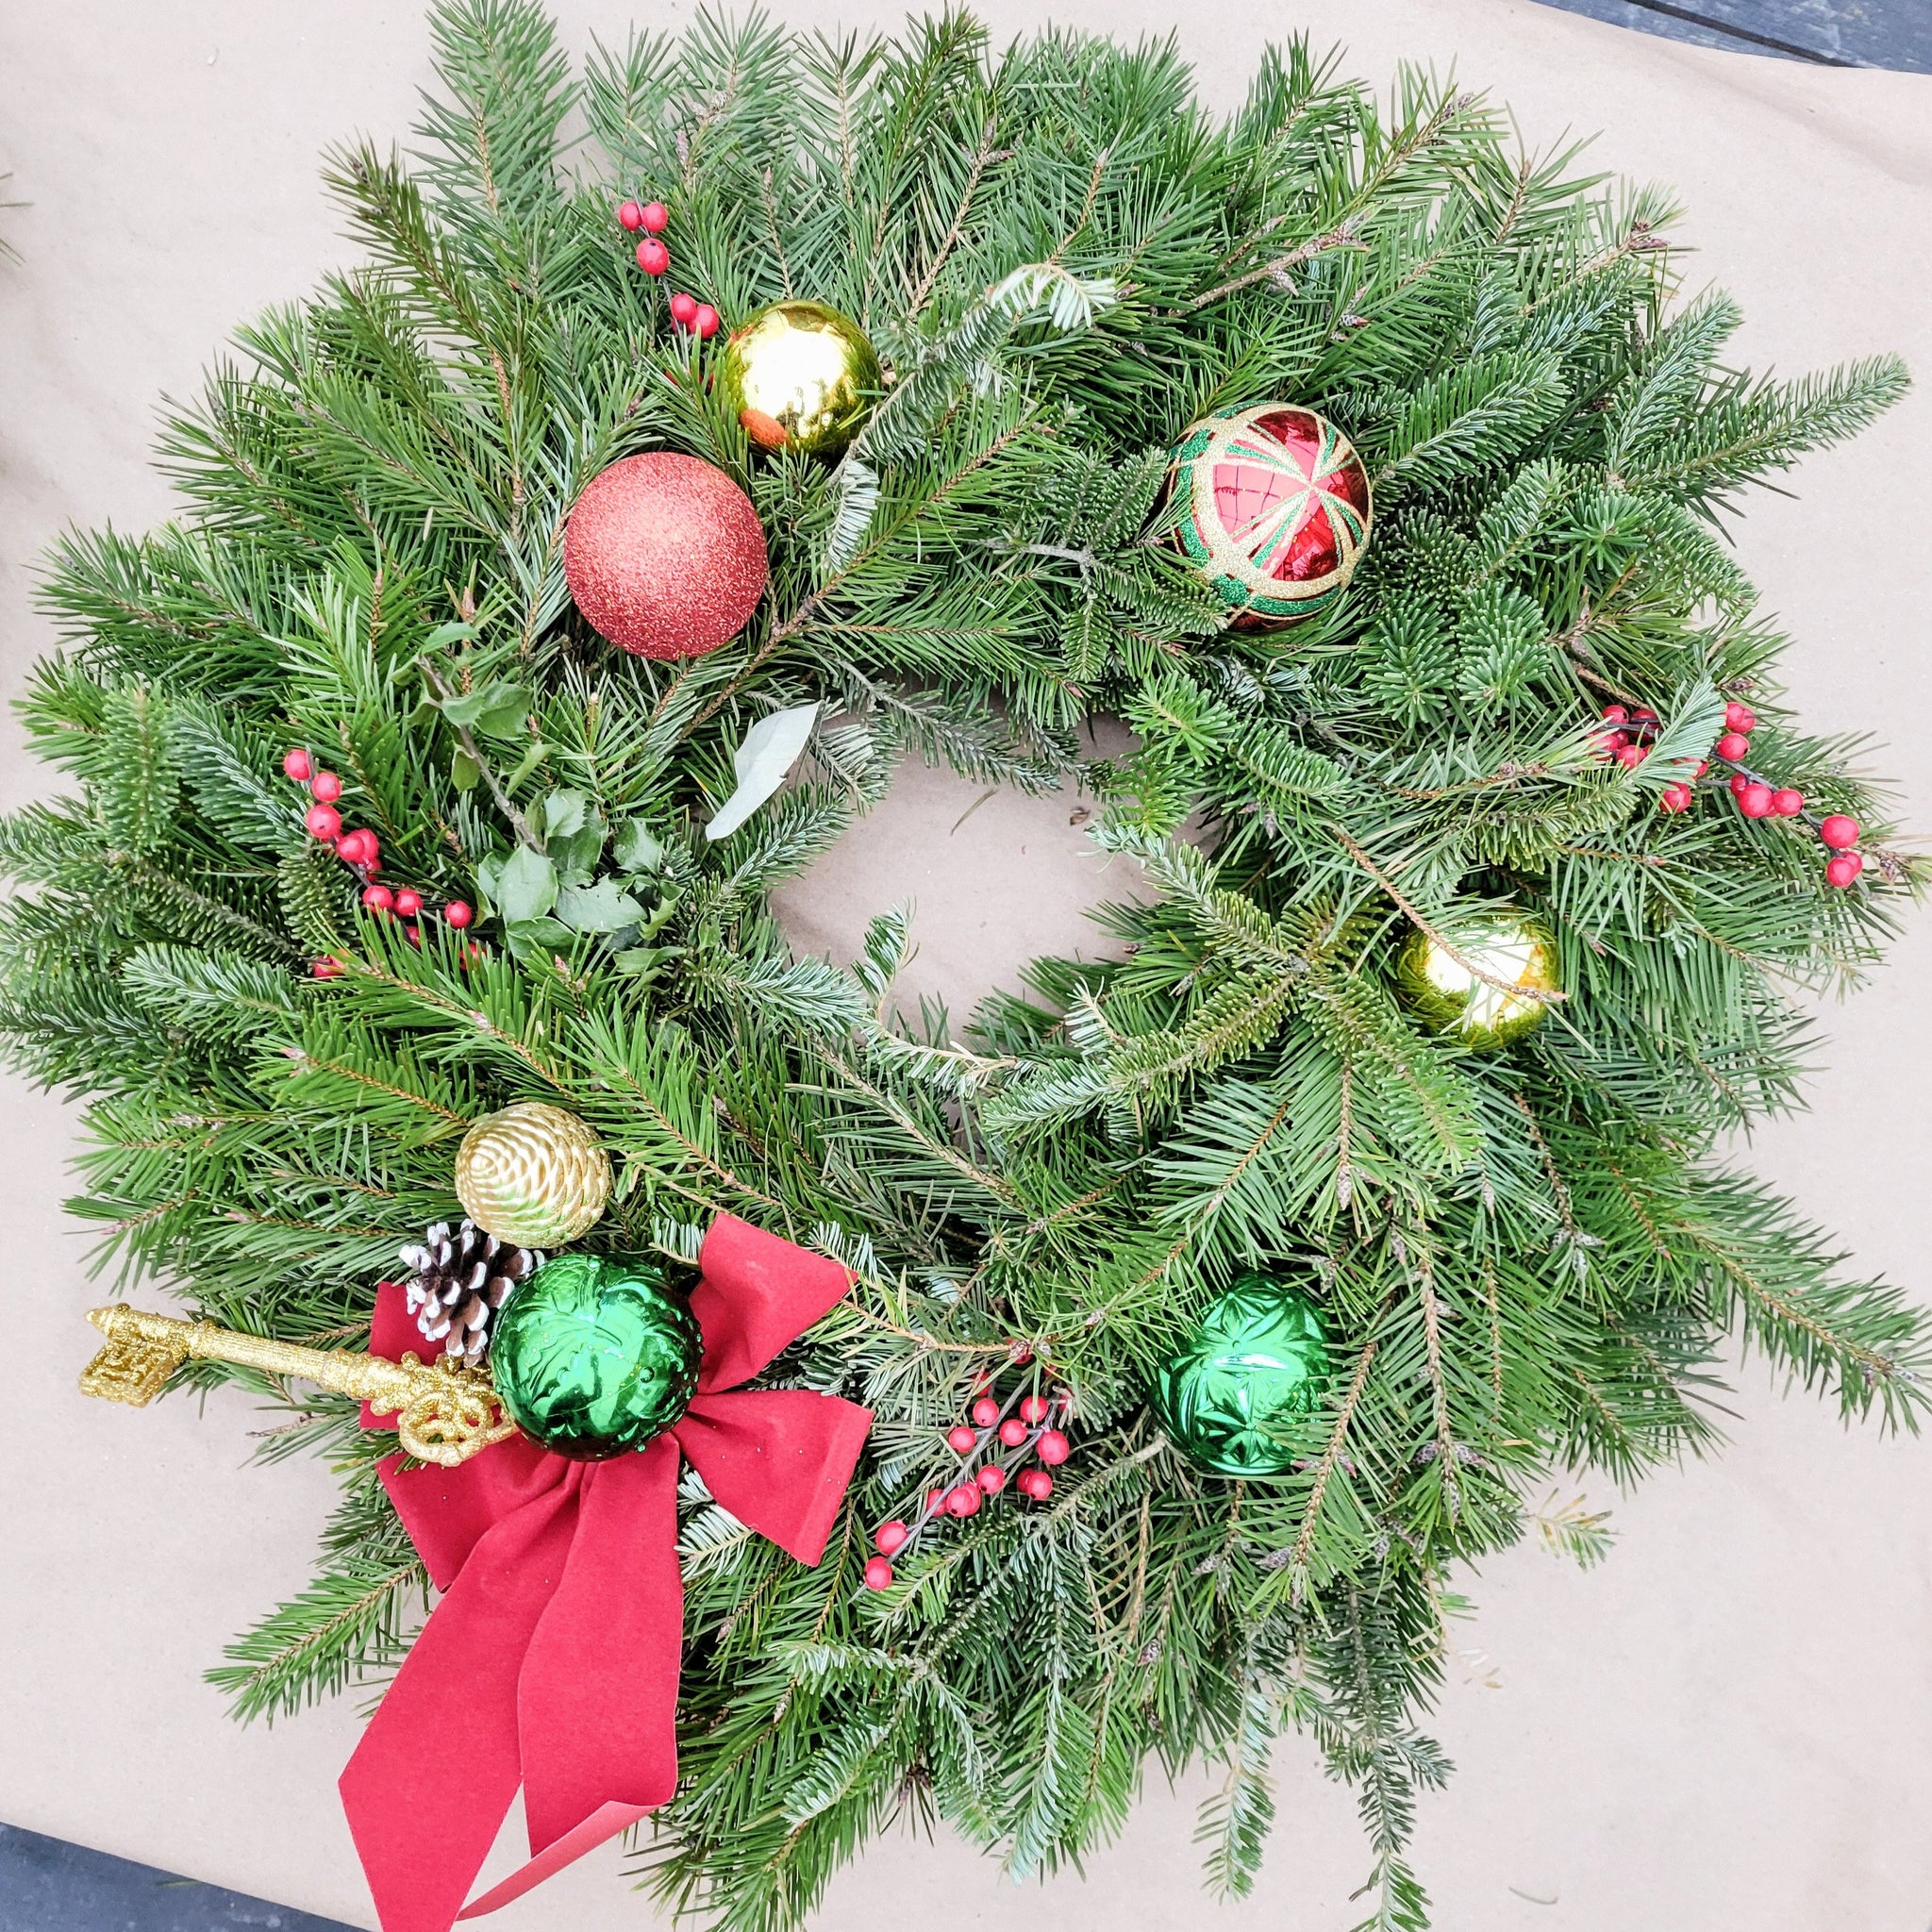 Holiday Tour: Kid's Wreath Decorating Workshop at The Makery 11/26